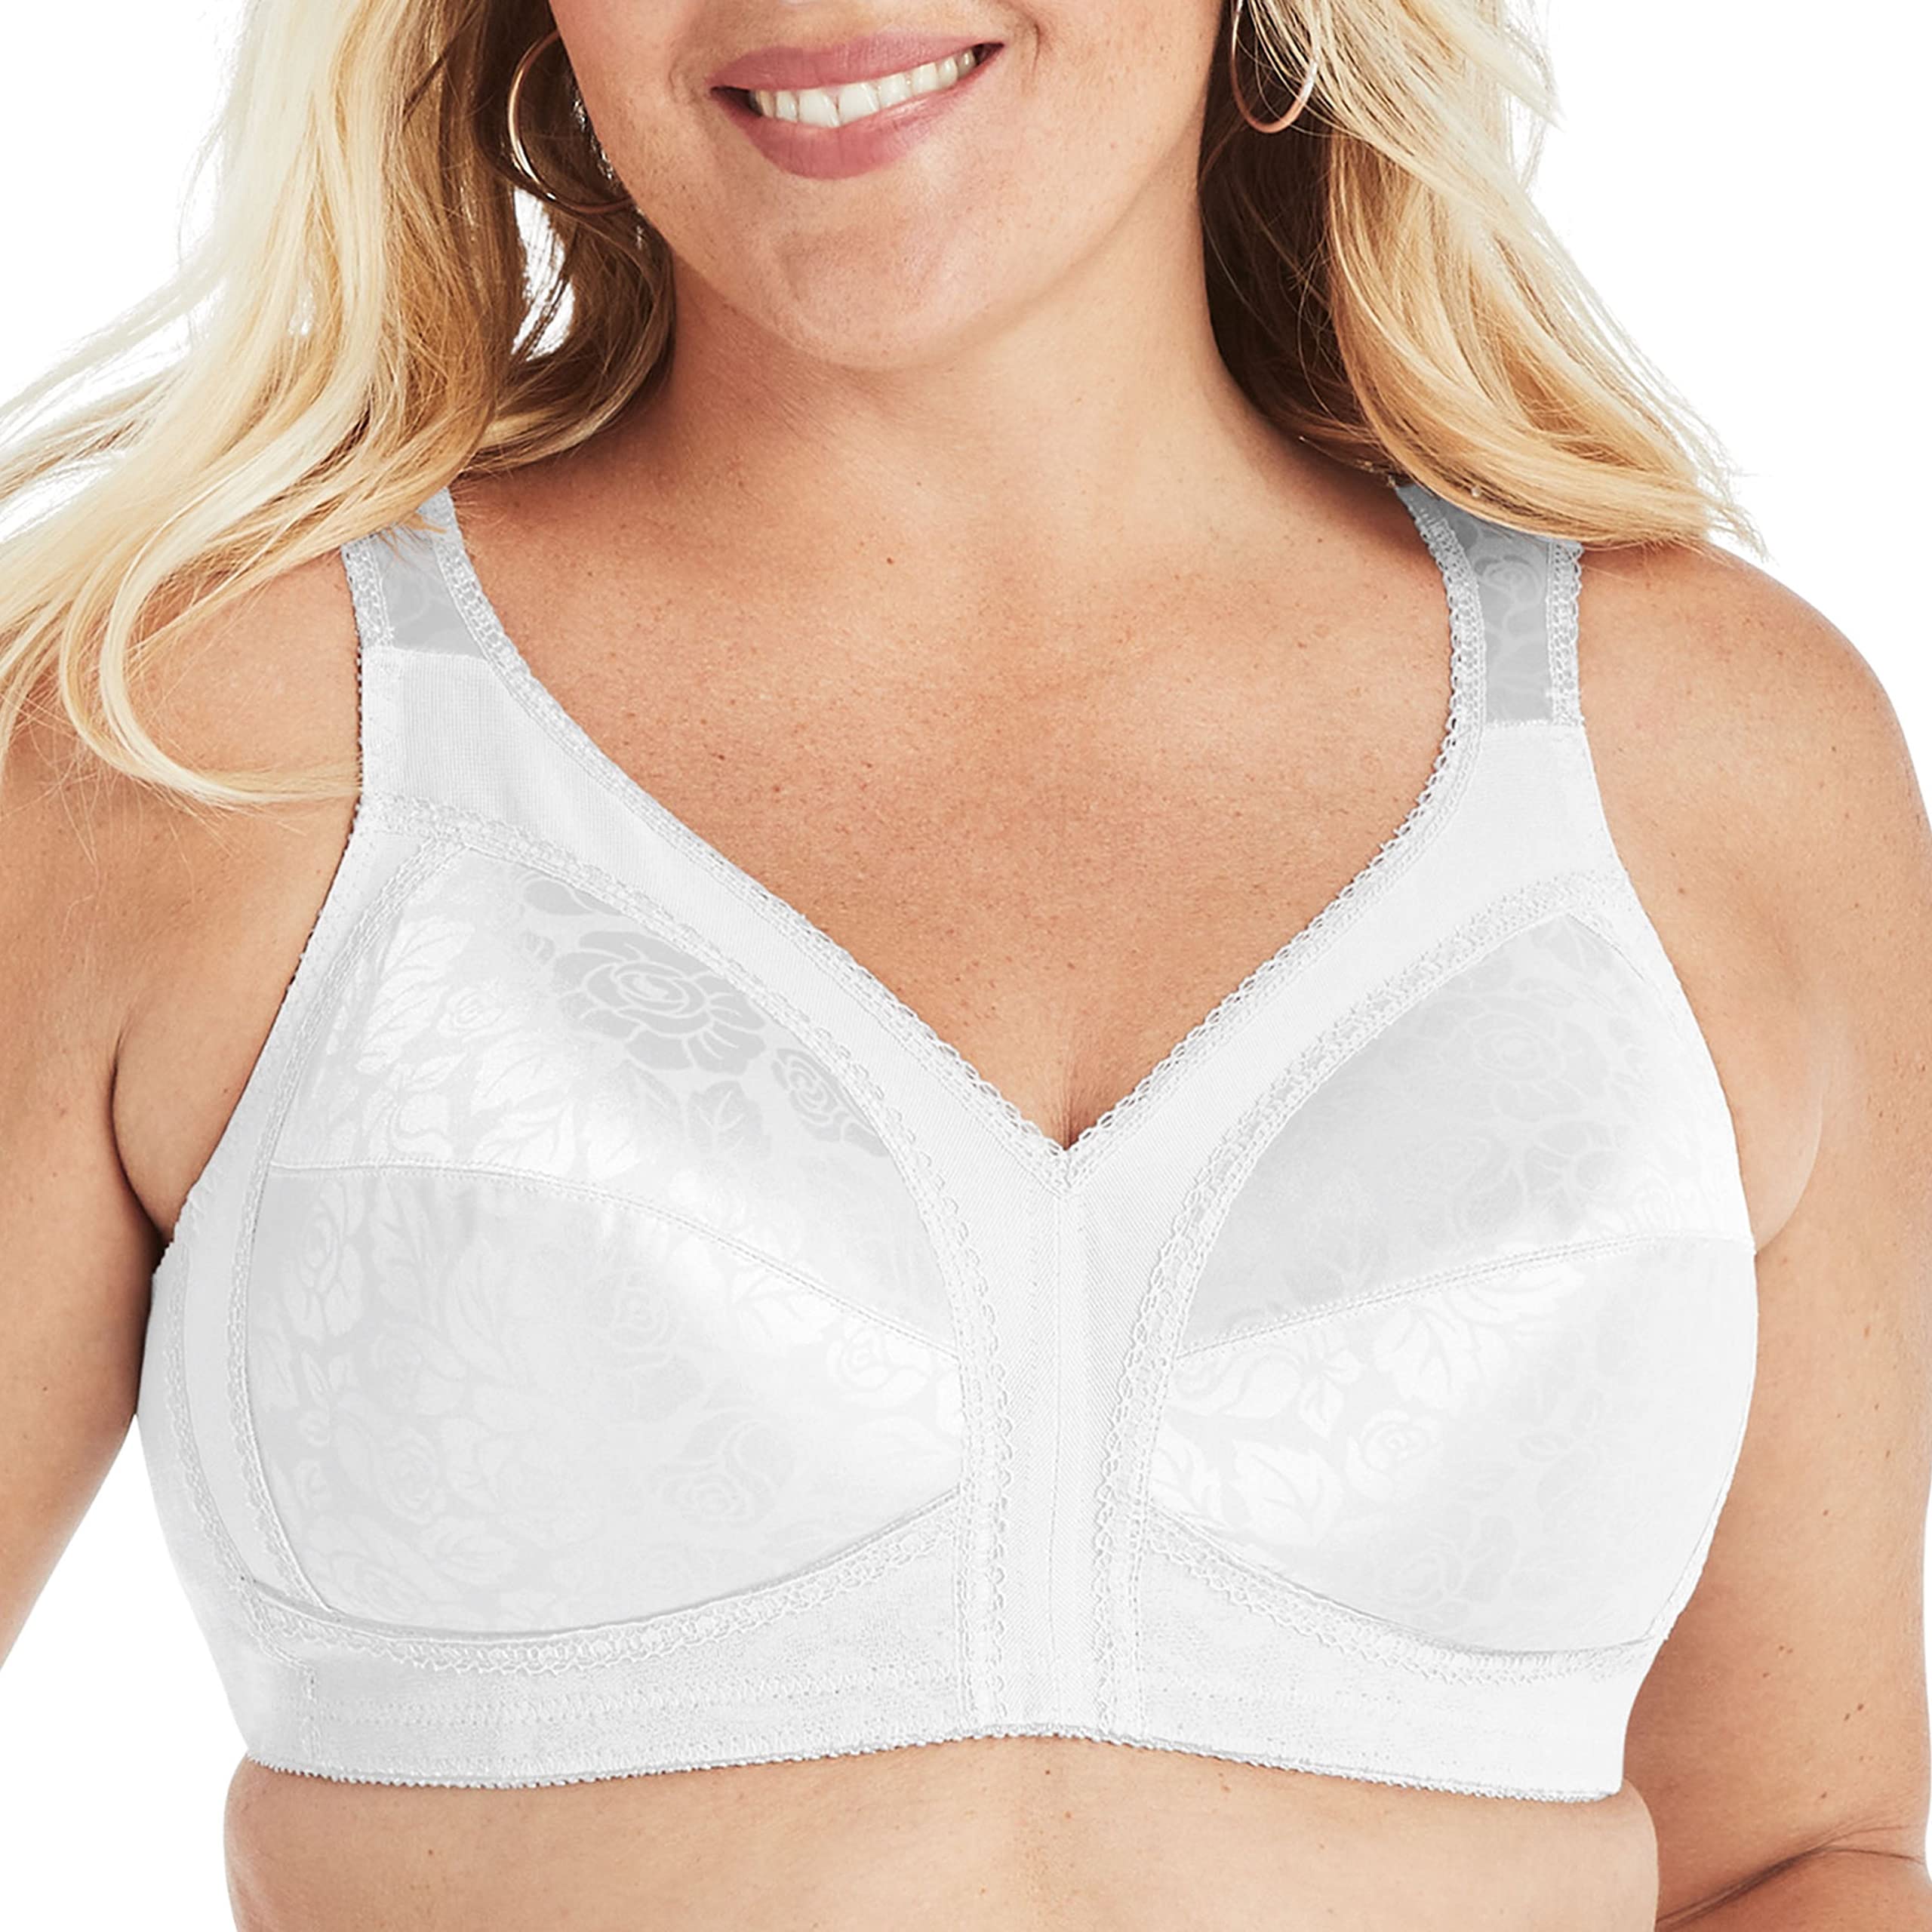 Playtex Women's 18 Hour Comfort-Strap Wireless, Full-Coverage Bra with 4-Way Trusupport, Single & 2-Pack